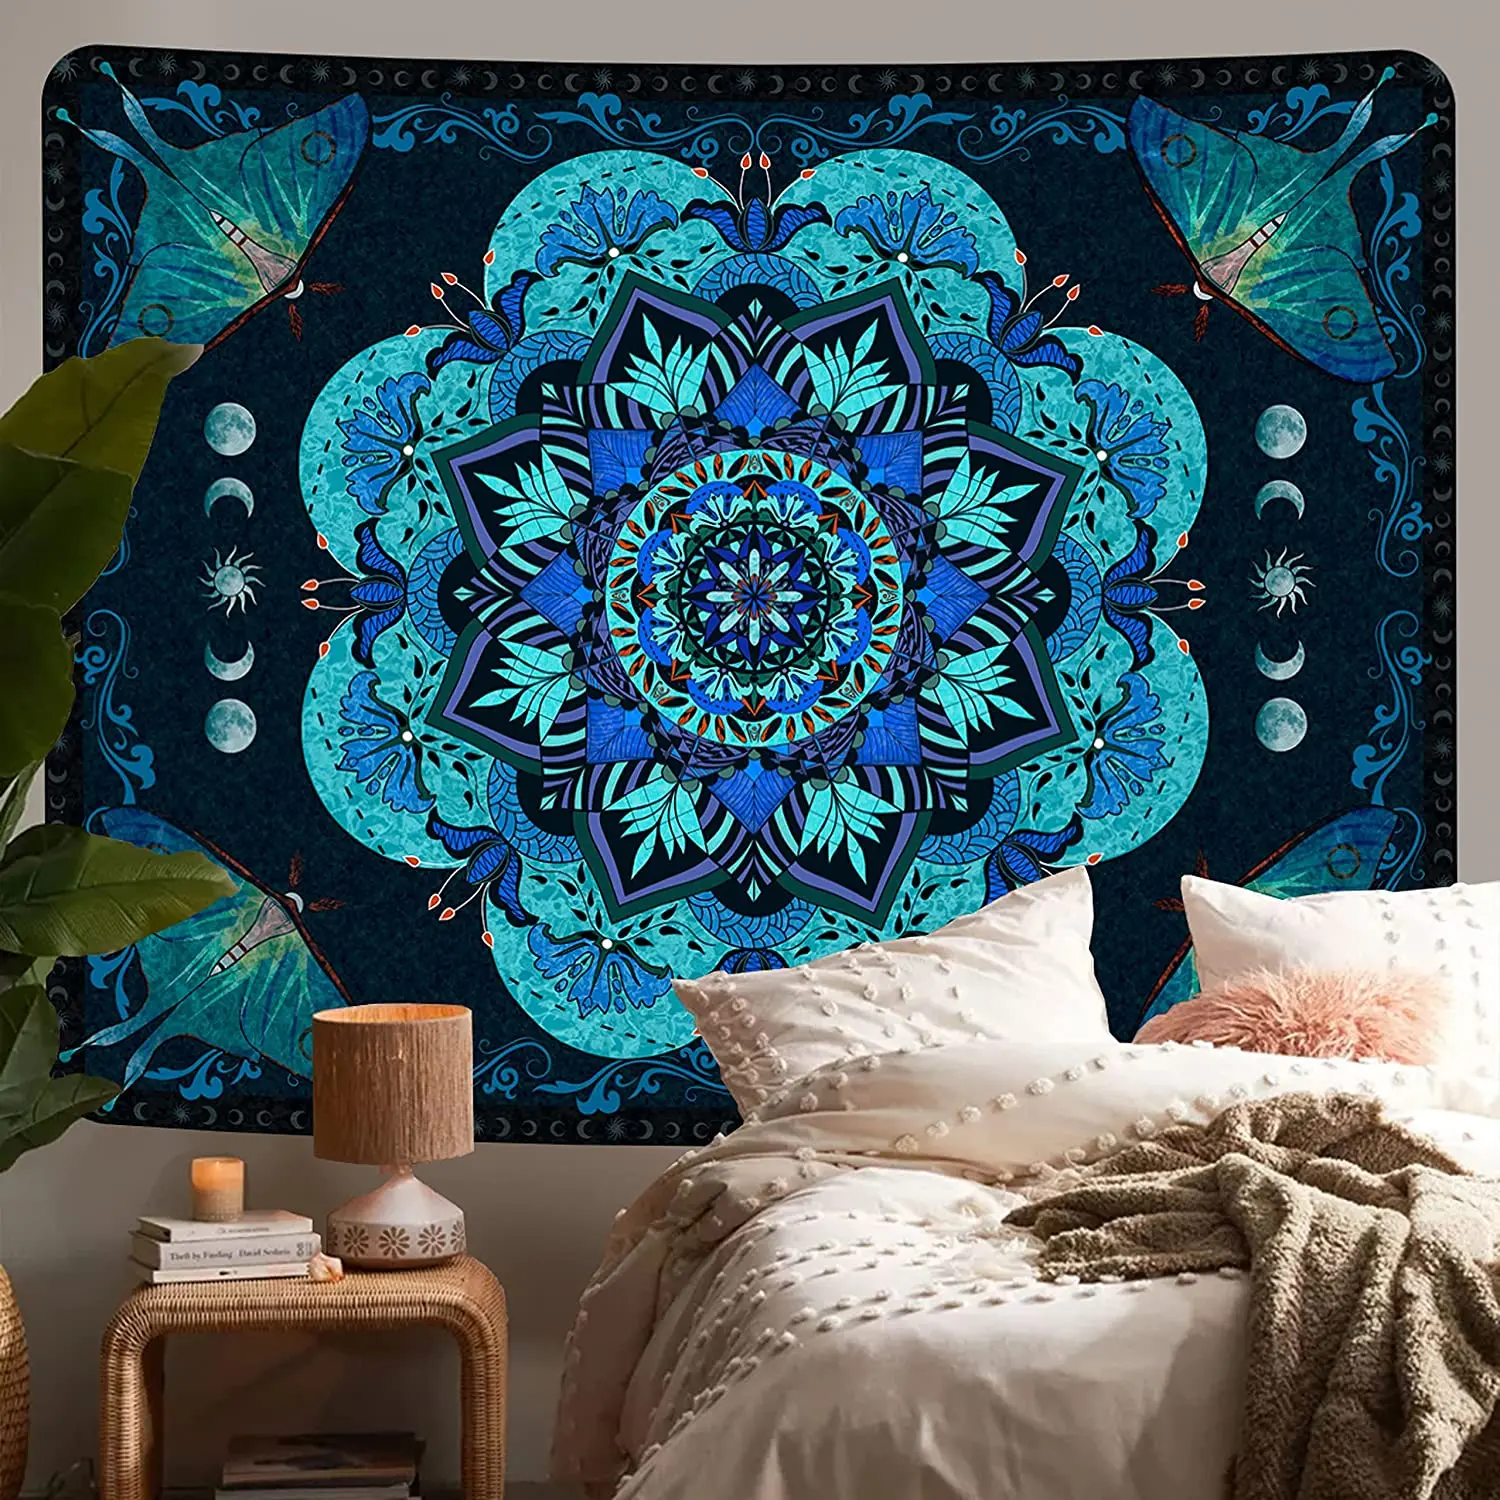 

Mandala Tapestry Room Decor Aesthetic Bohemian Tapestries Gothic Sun and Moon Moth Boho Wall Hanging Gothic Hippie Home Decor